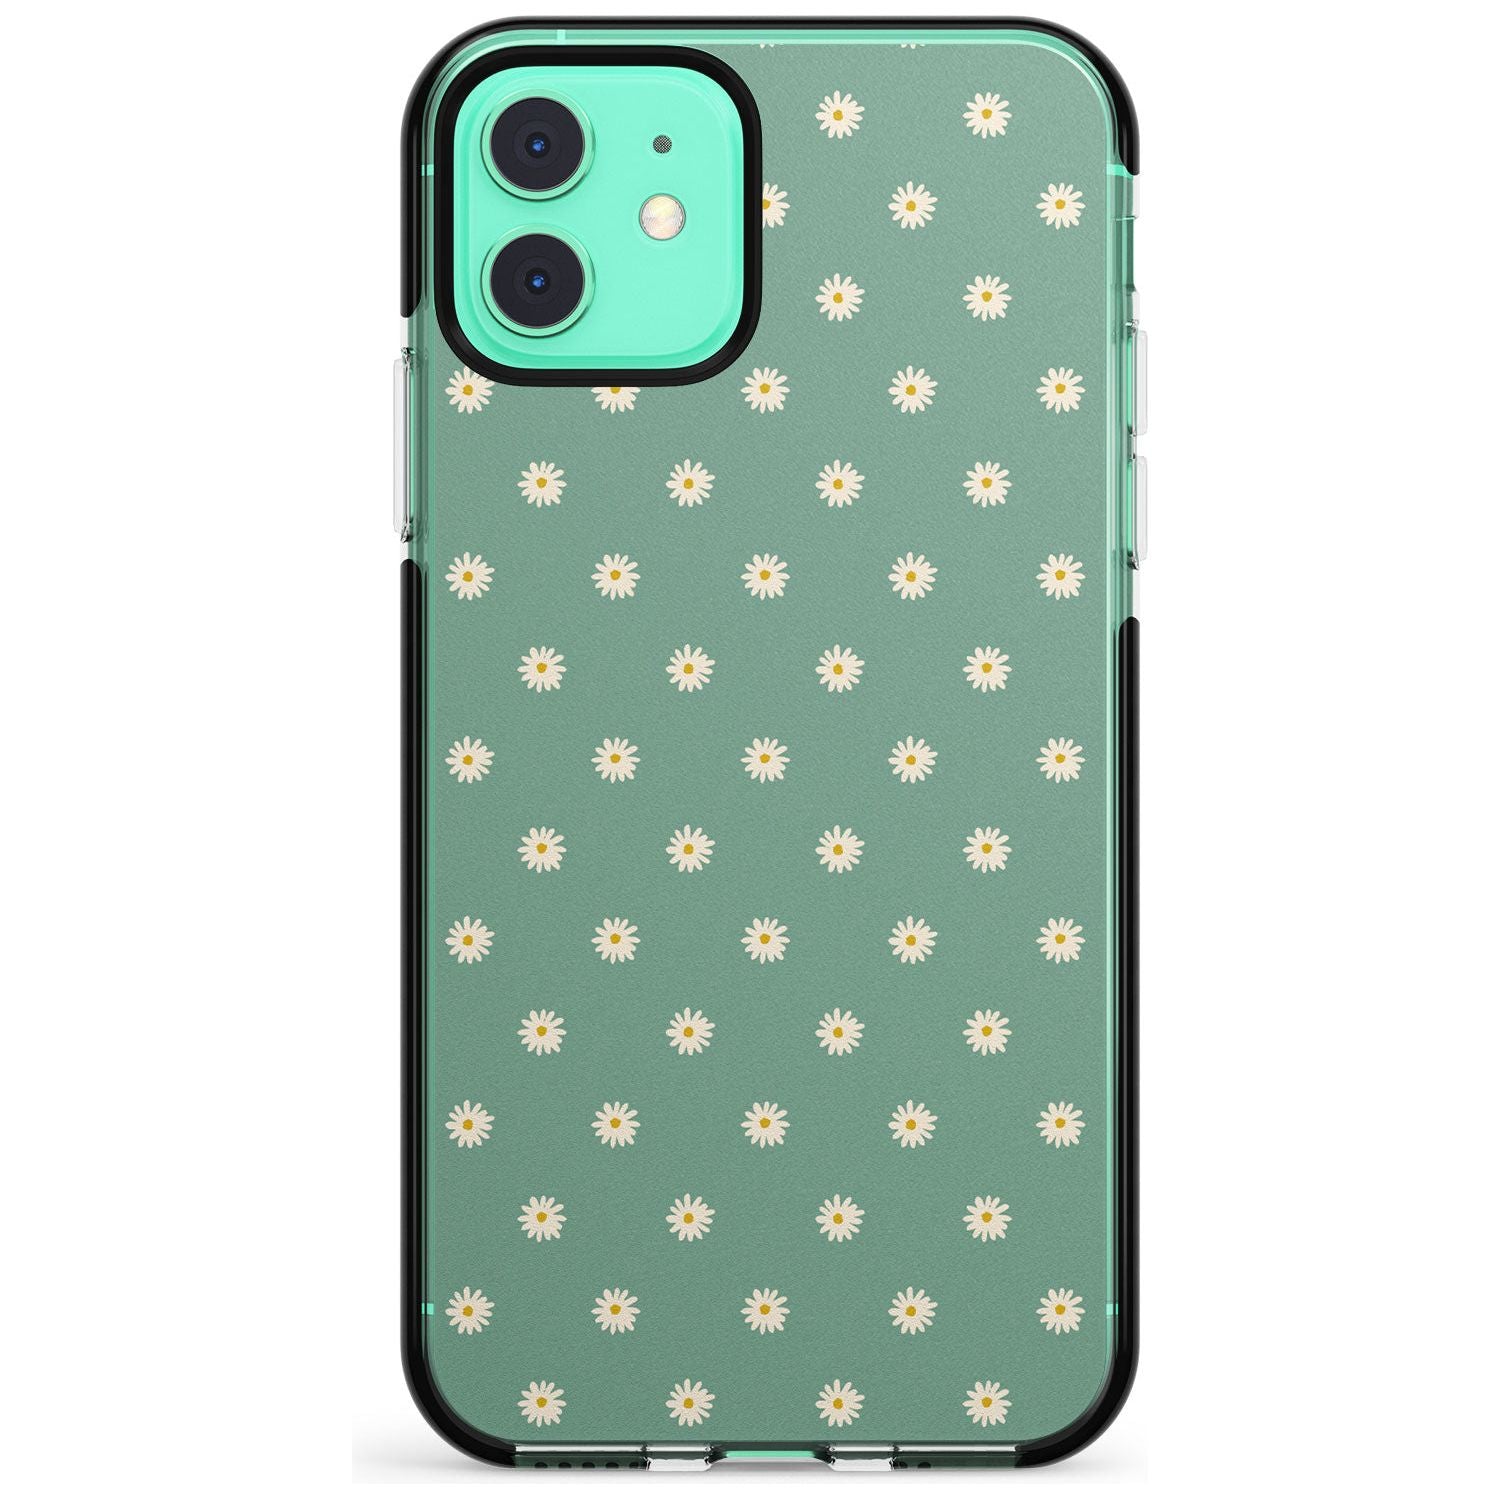 Daisy Pattern - Teal Cute Floral Daisy Design Pink Fade Impact Phone Case for iPhone 11 Pro Max